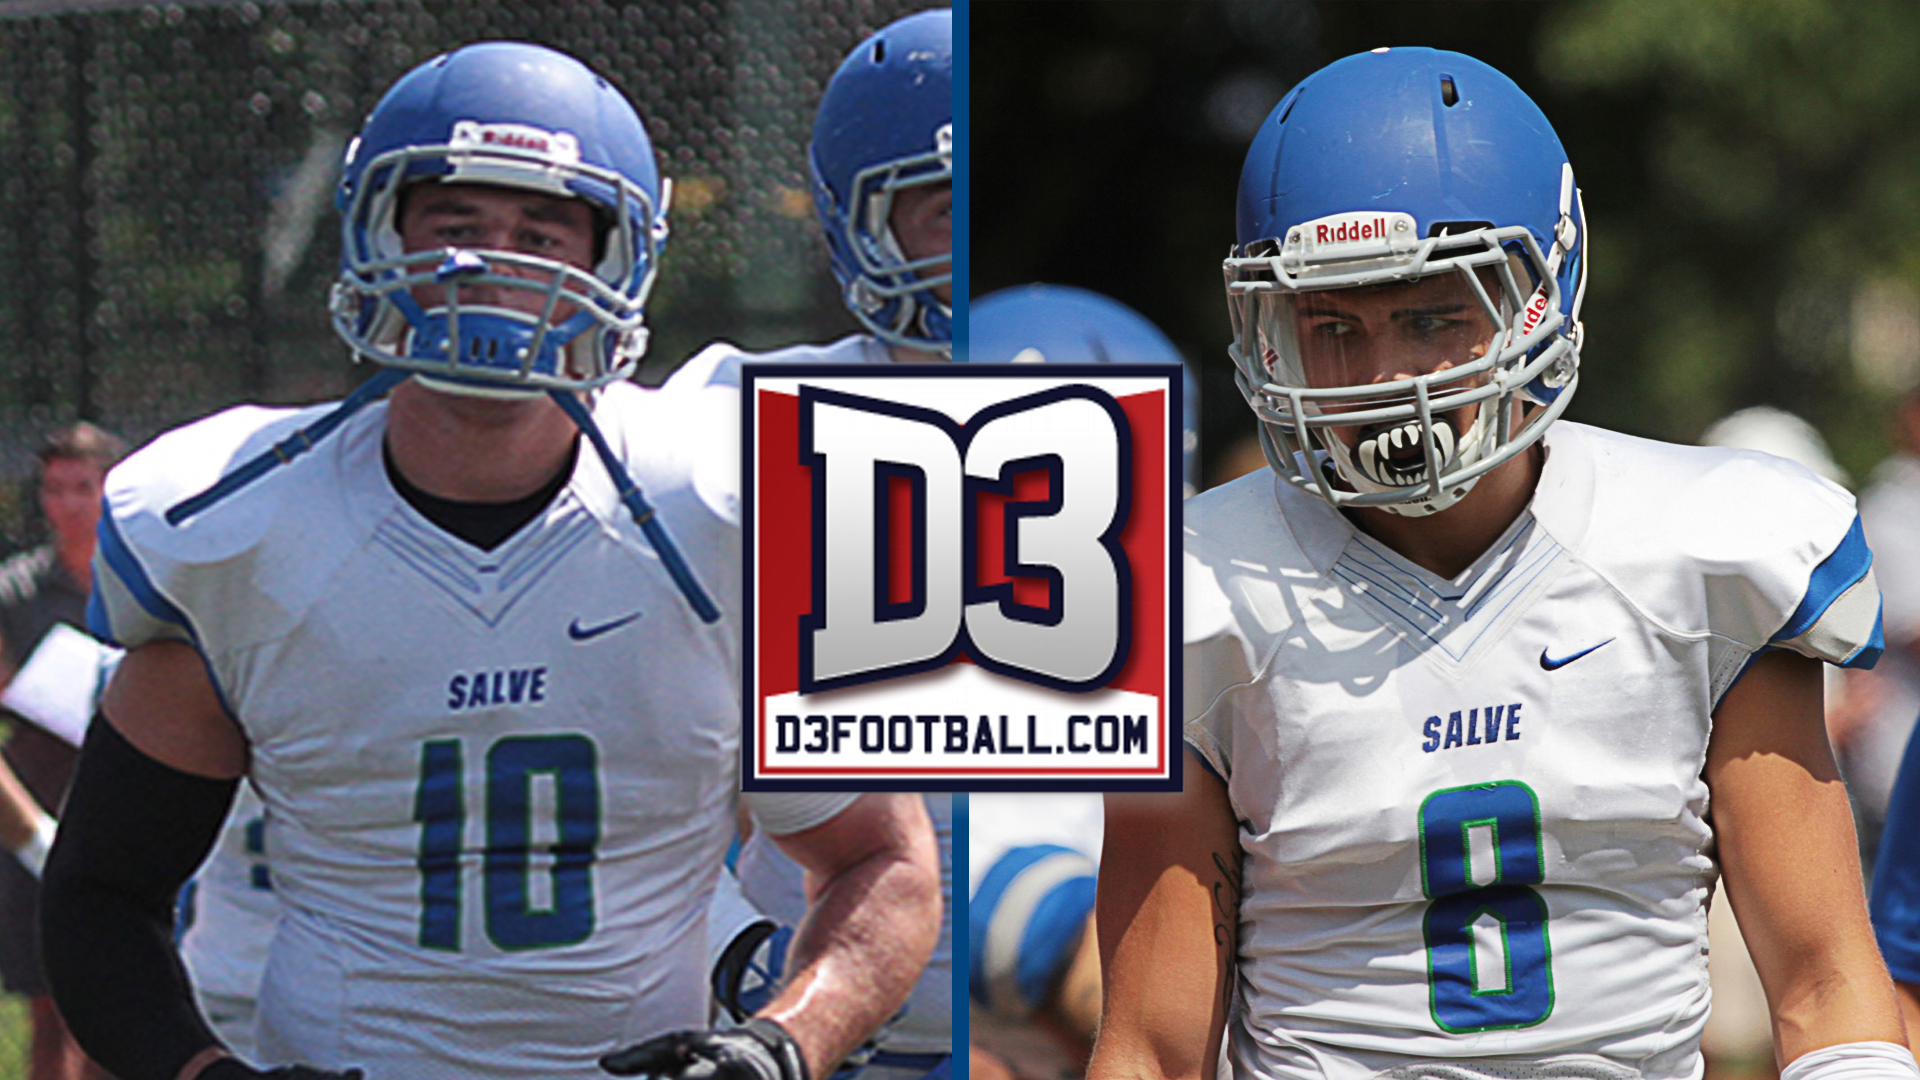 John Salute (l) and Matt Sylvia (r) have been named to the D3football.com All-East region team.